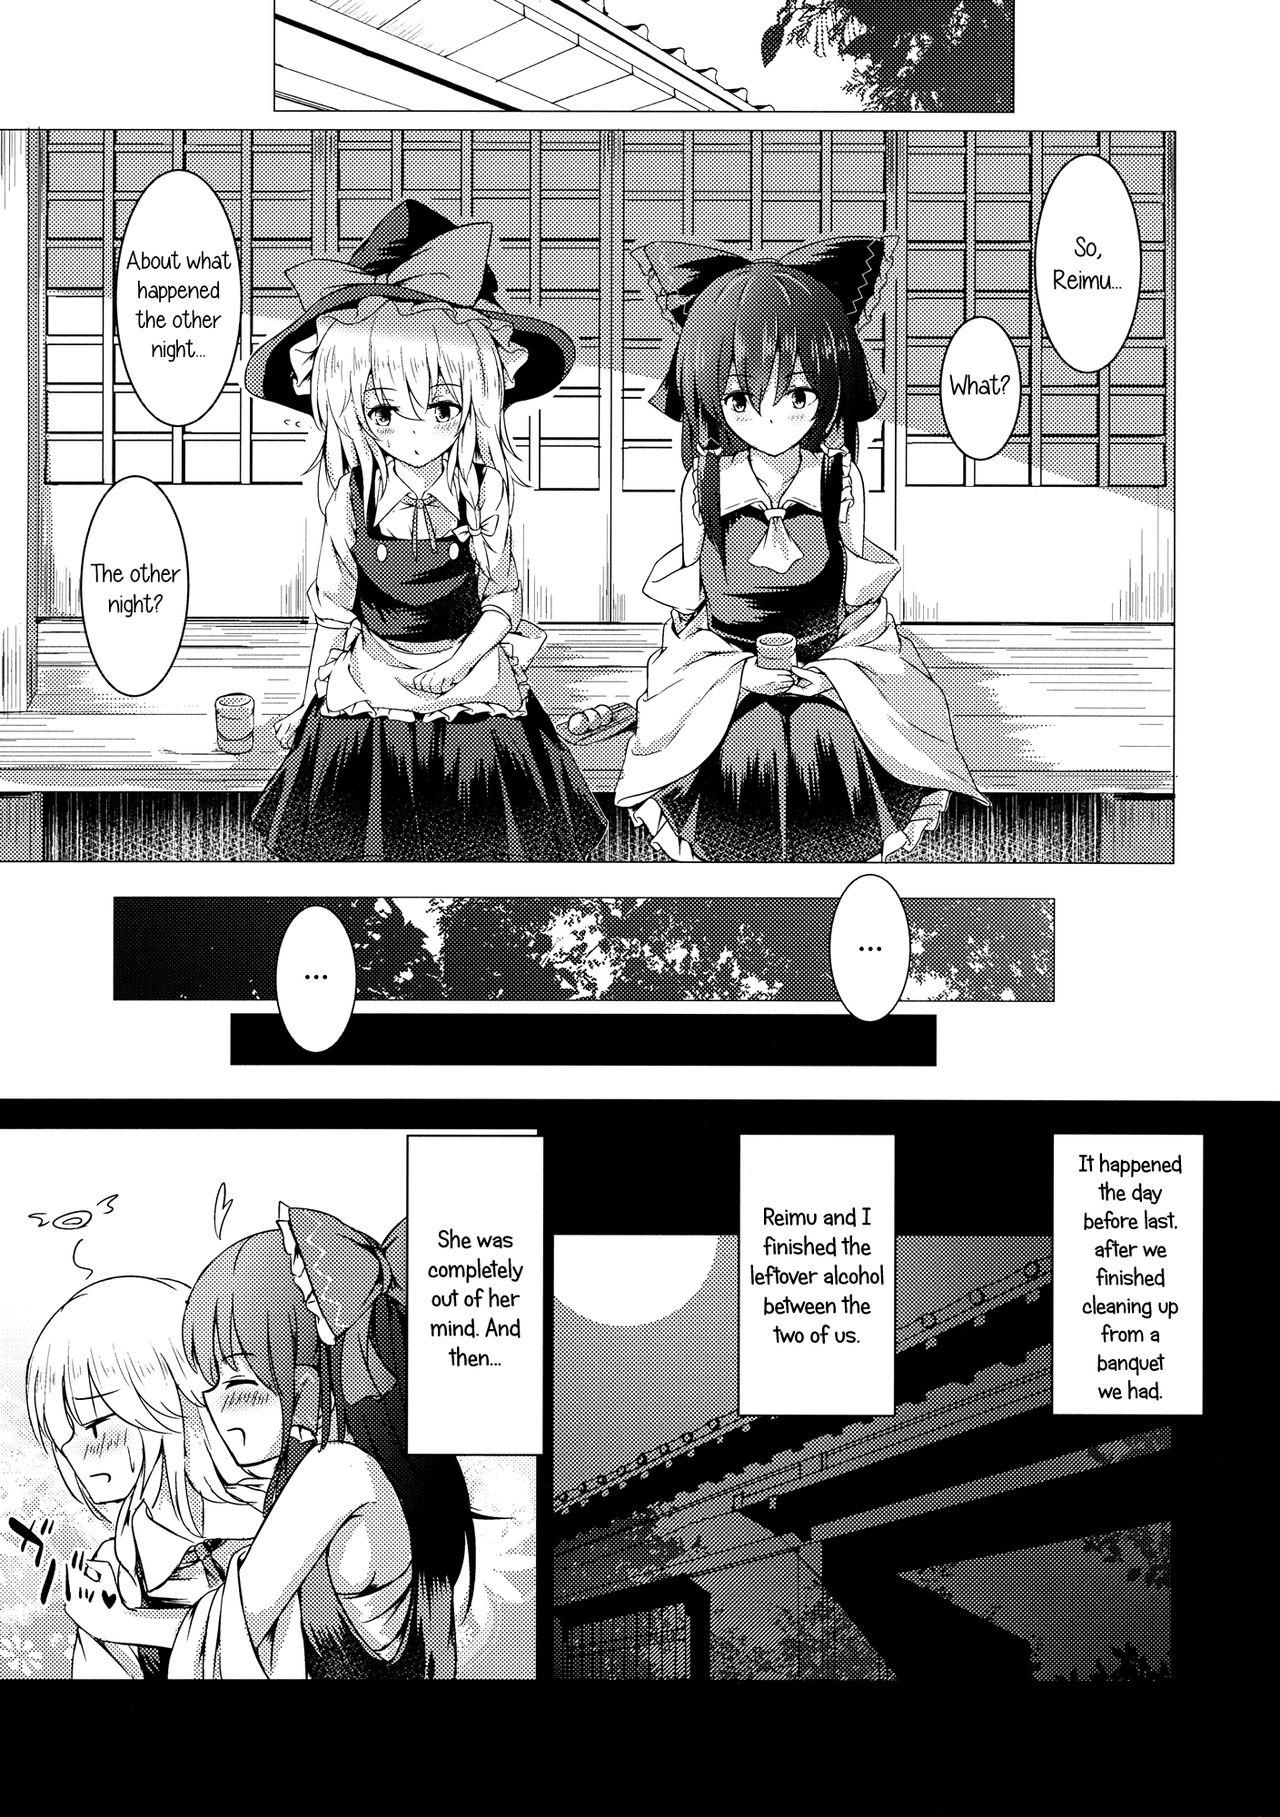 Ride ever since - Touhou project Teen Hardcore - Page 4